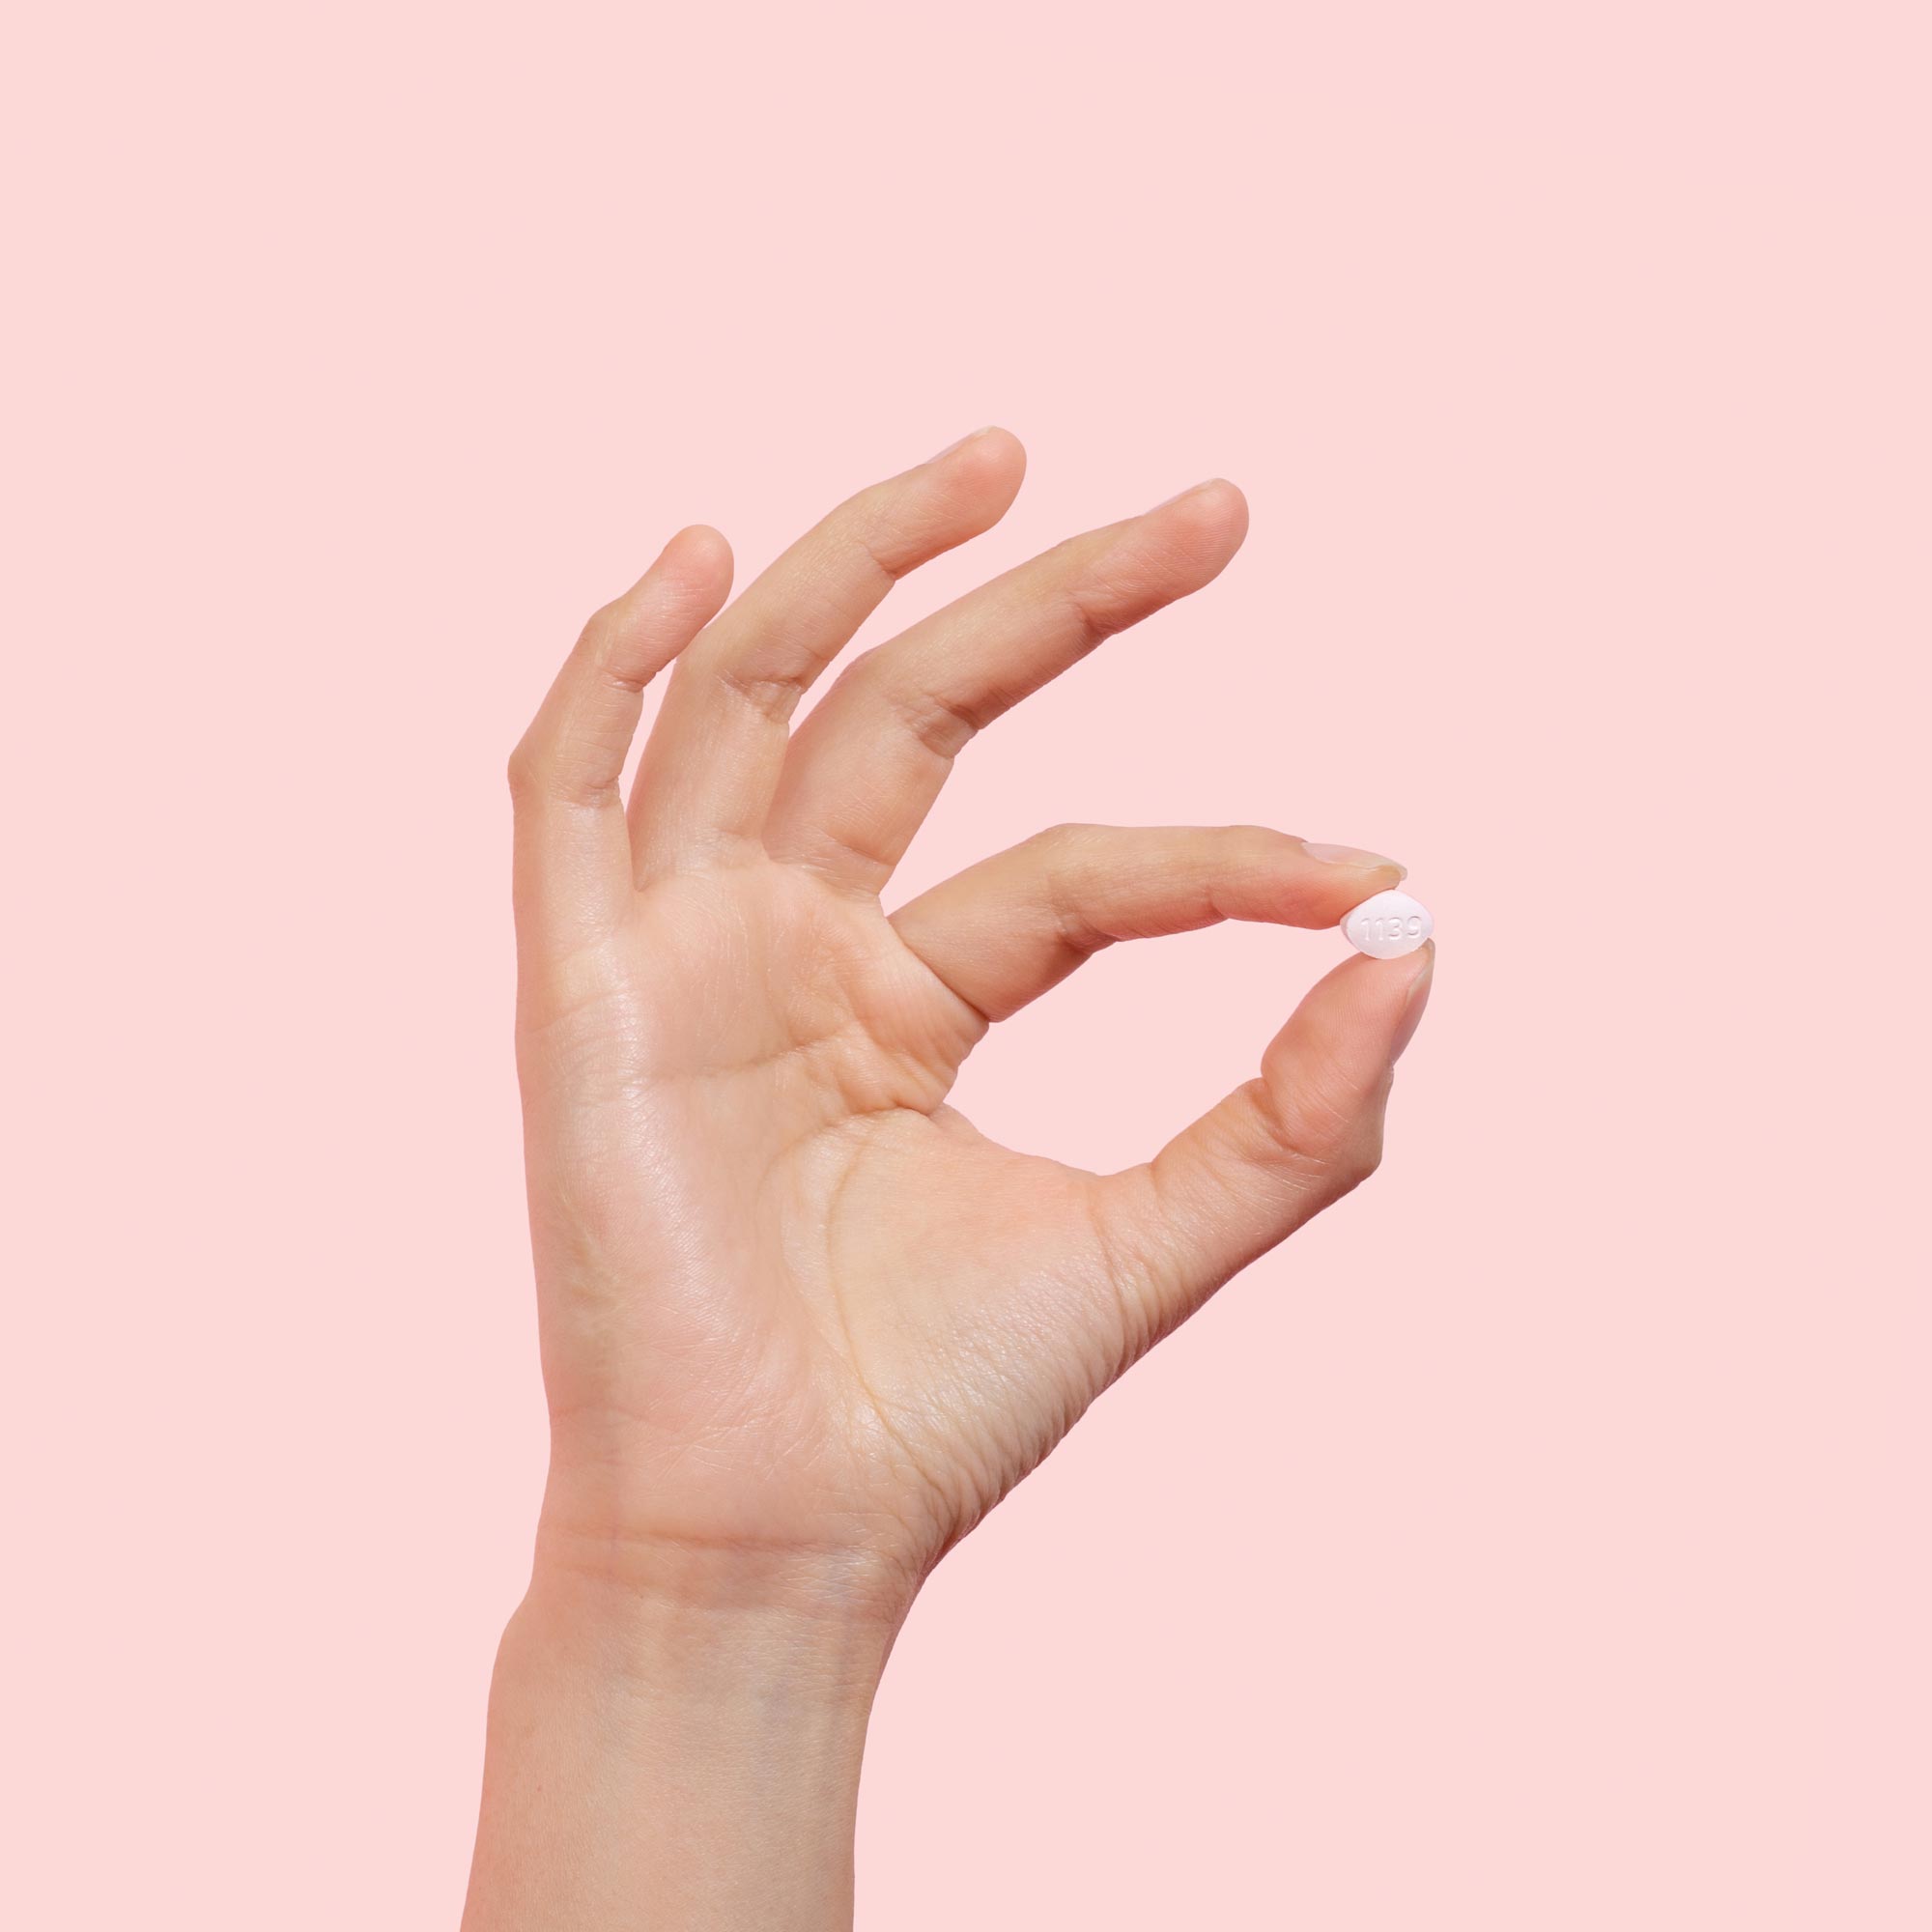 Woman's hand holding antifungal pill to treat yeast infections on a pink background